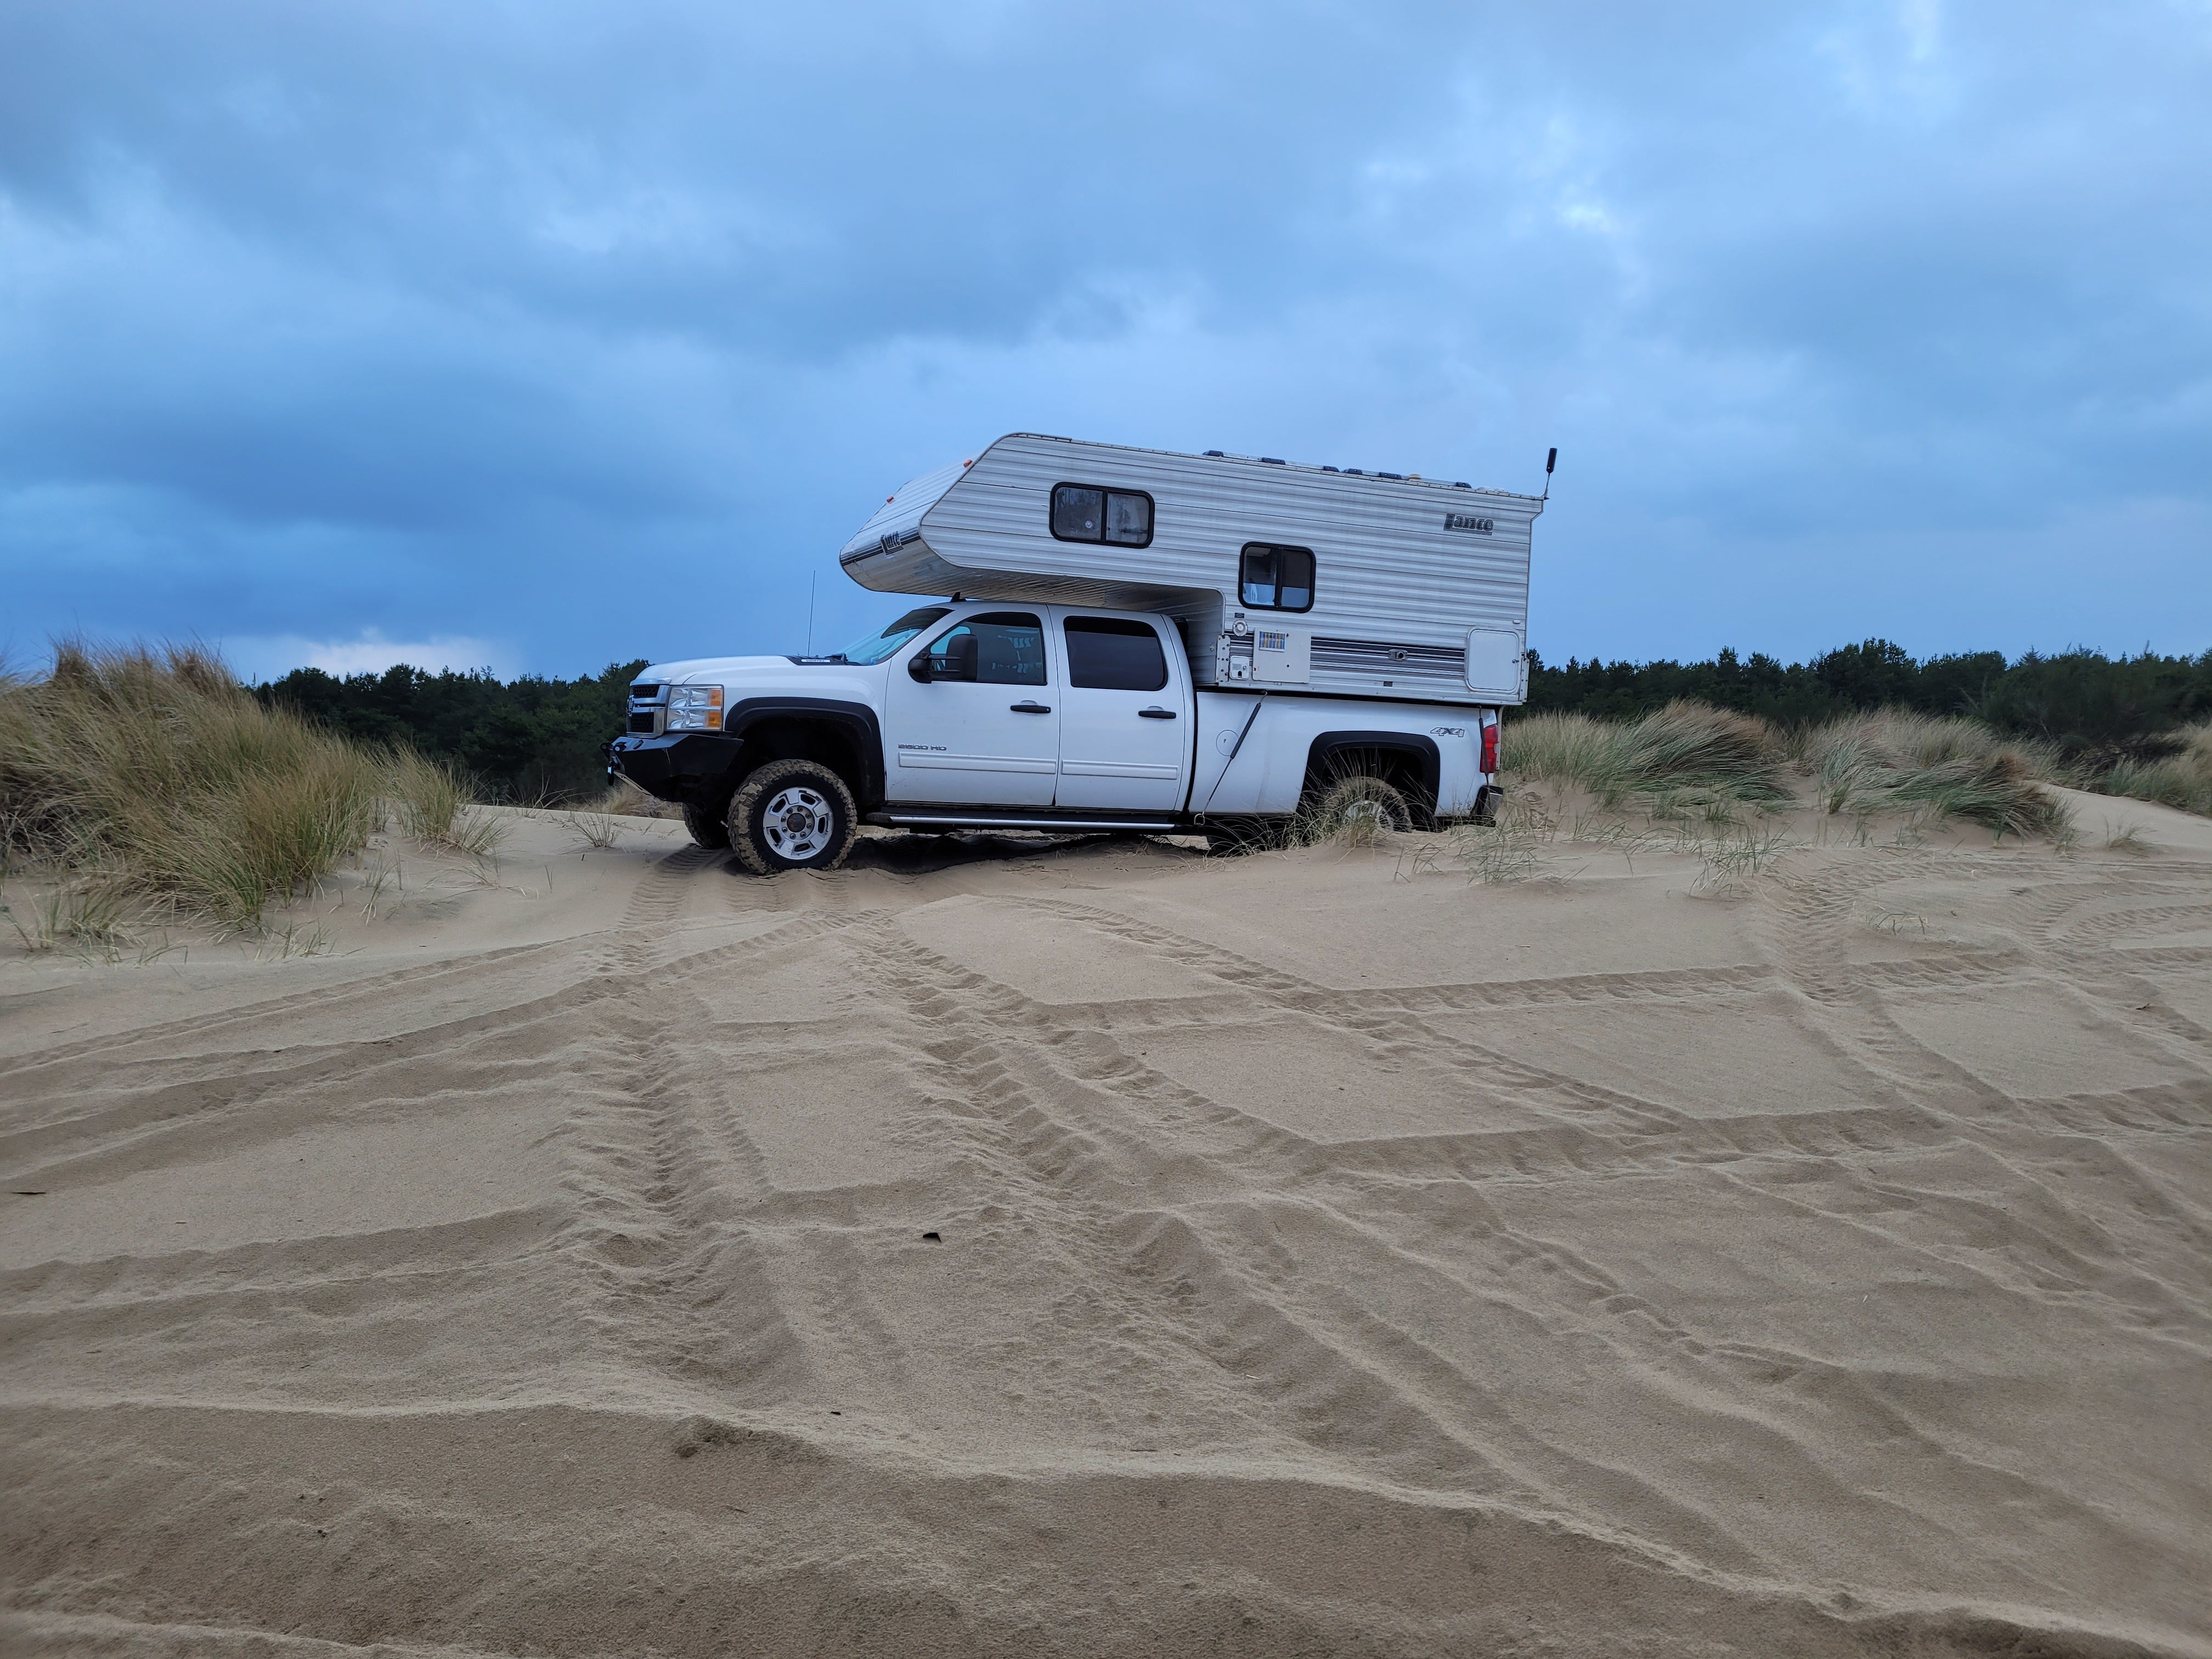 Camper submitted image from South Jetty Sand Camping - 2